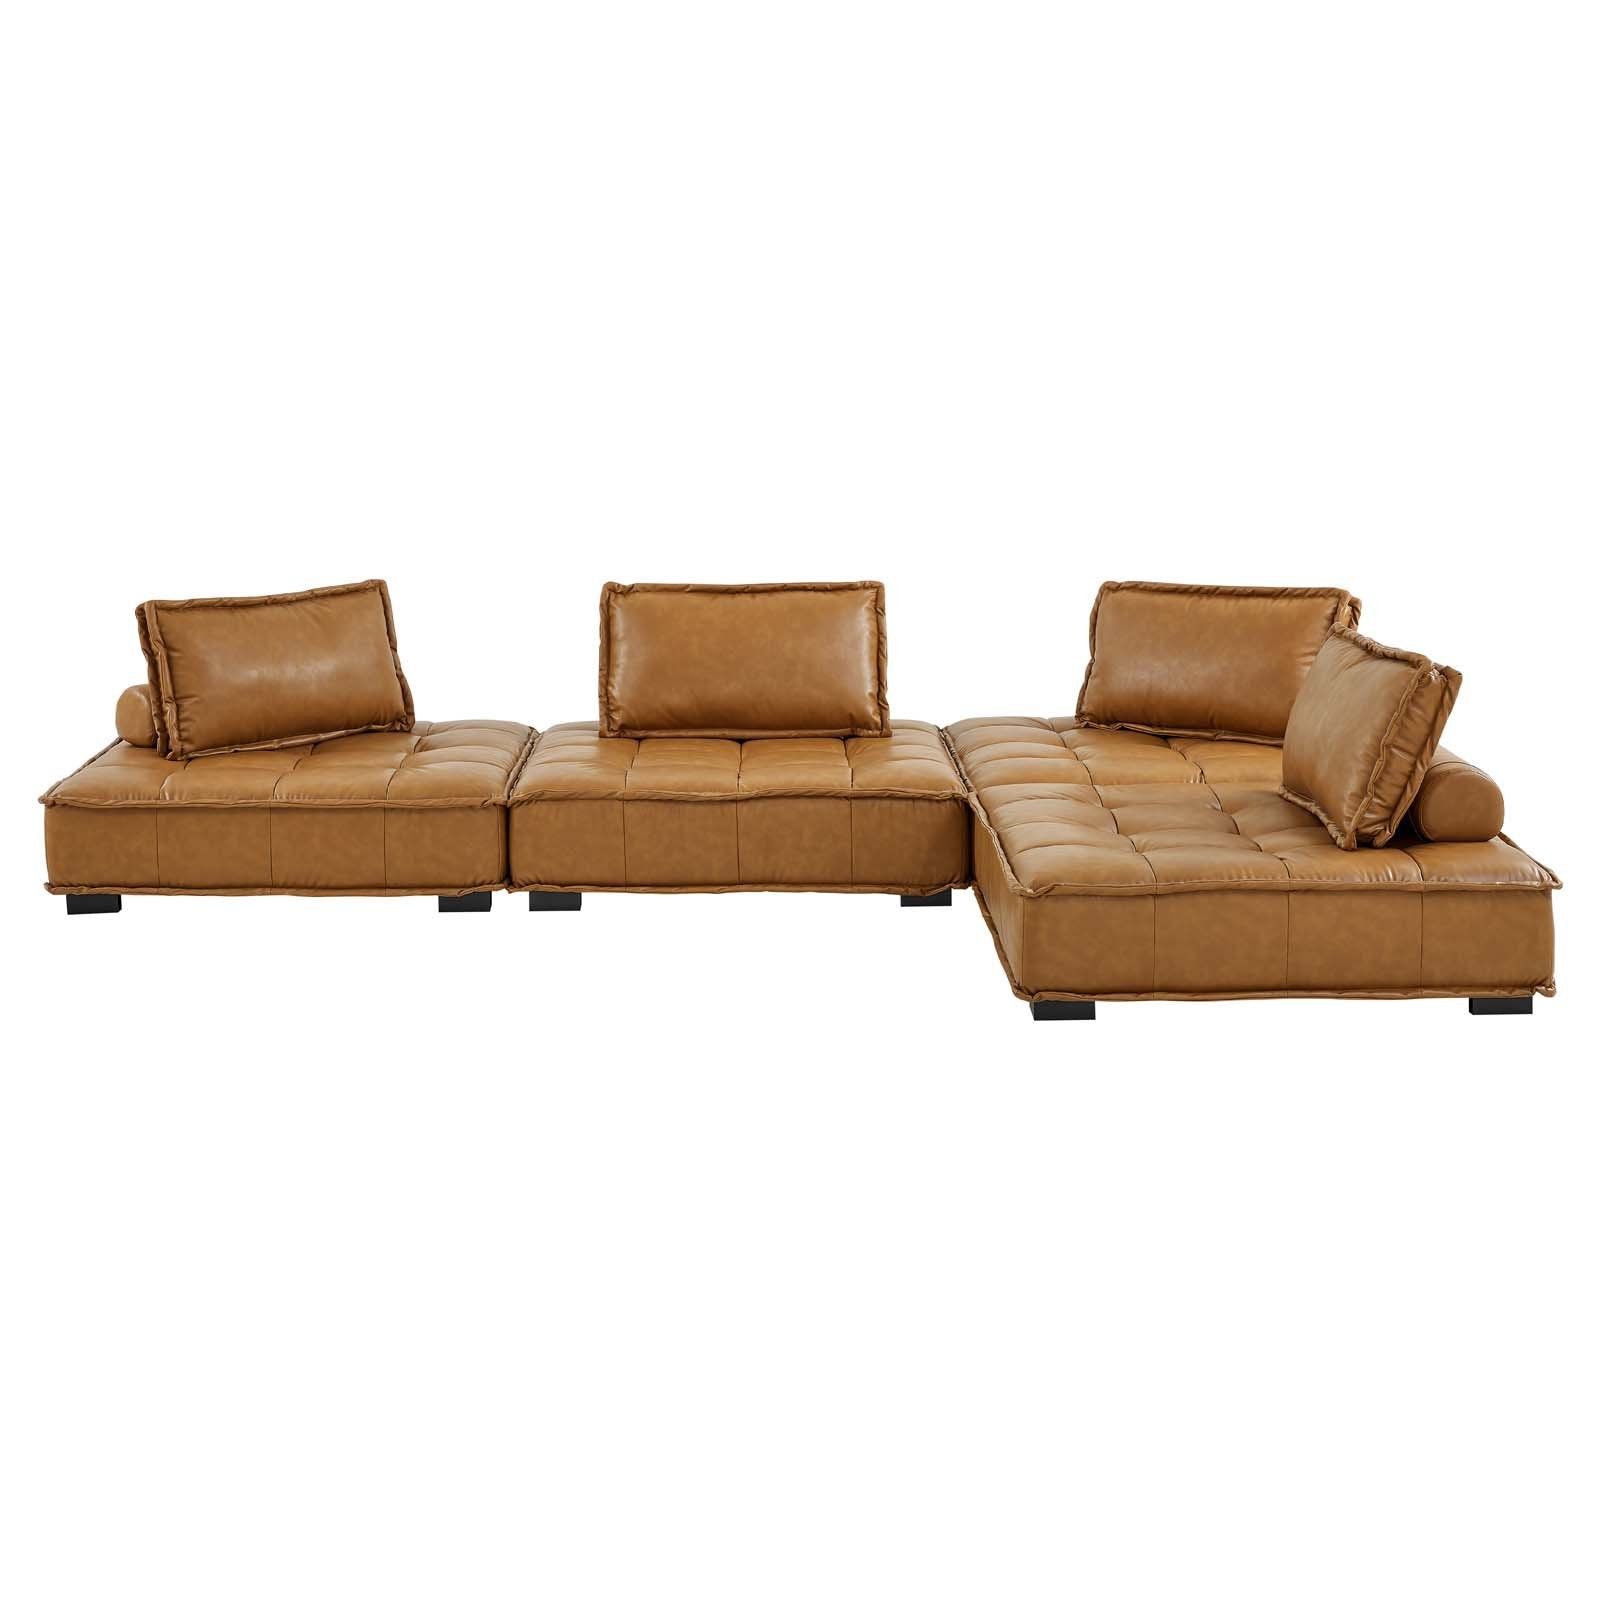 Saunter Tufted Vegan Leather 4-Piece Sectional Sofa - East Shore Modern Home Furnishings